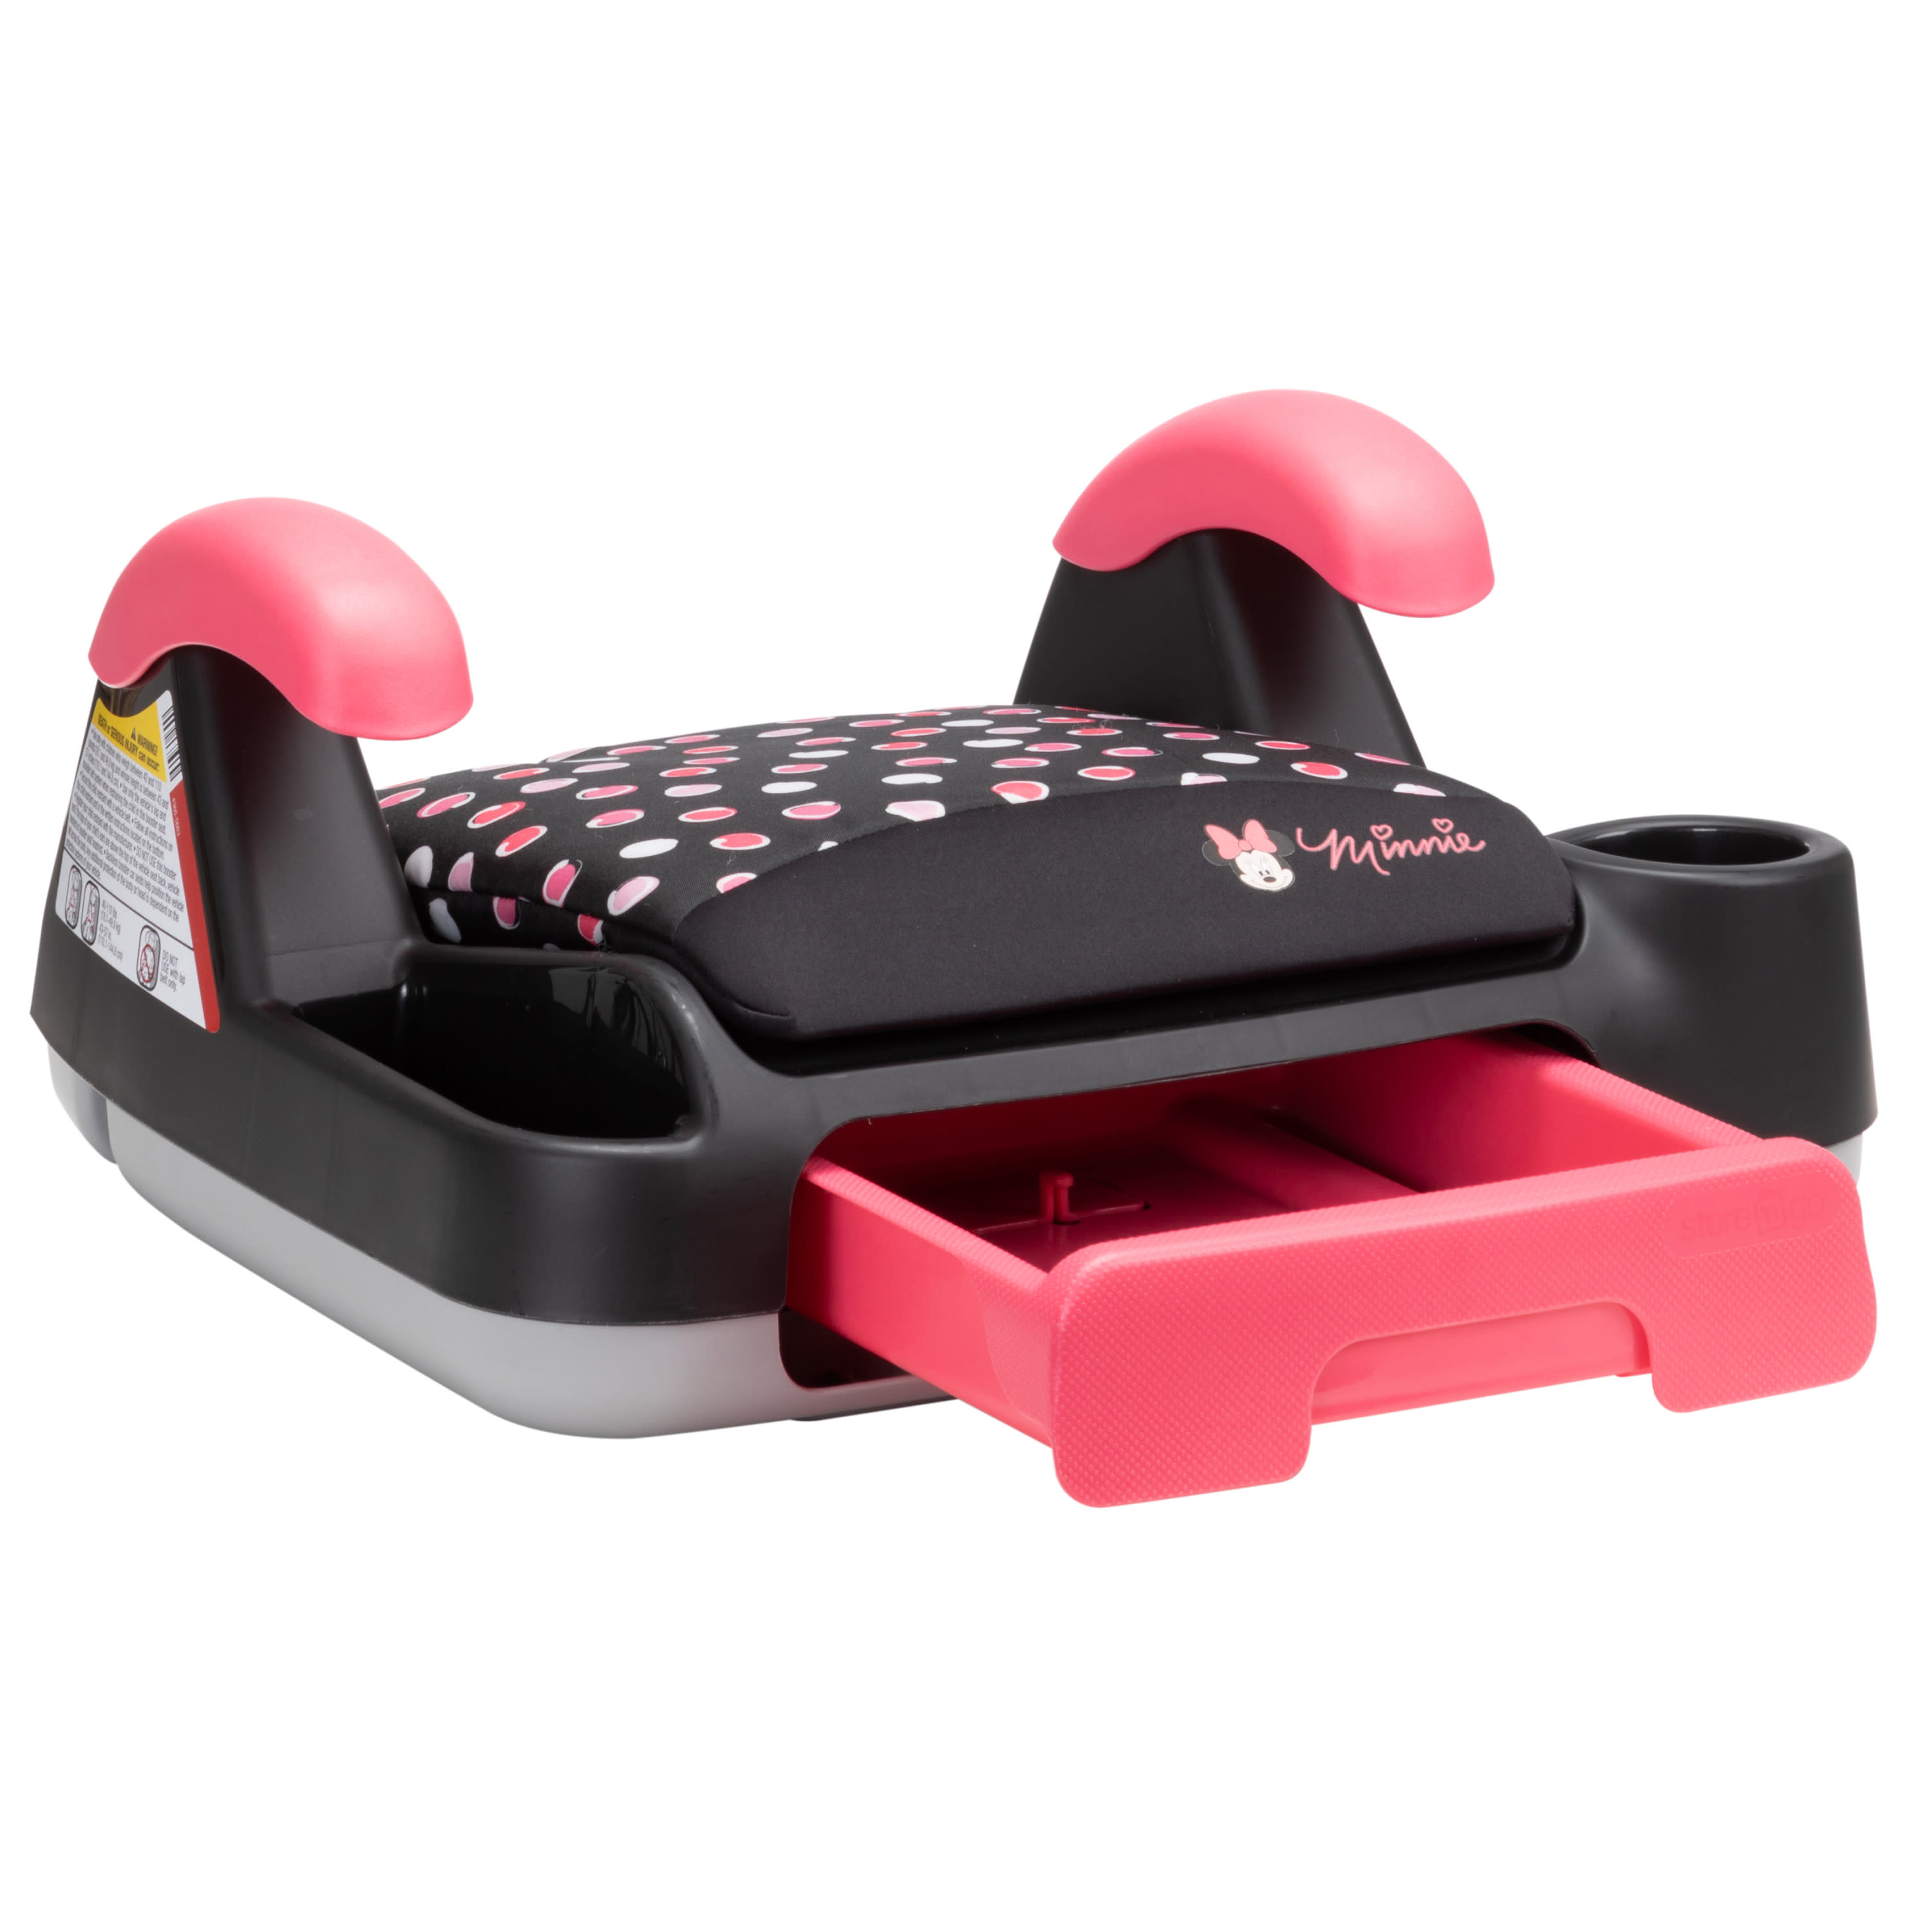 Disney Baby Store 'n Go Sport Booster Car Seat, Minnie Mash Up - image 15 of 21